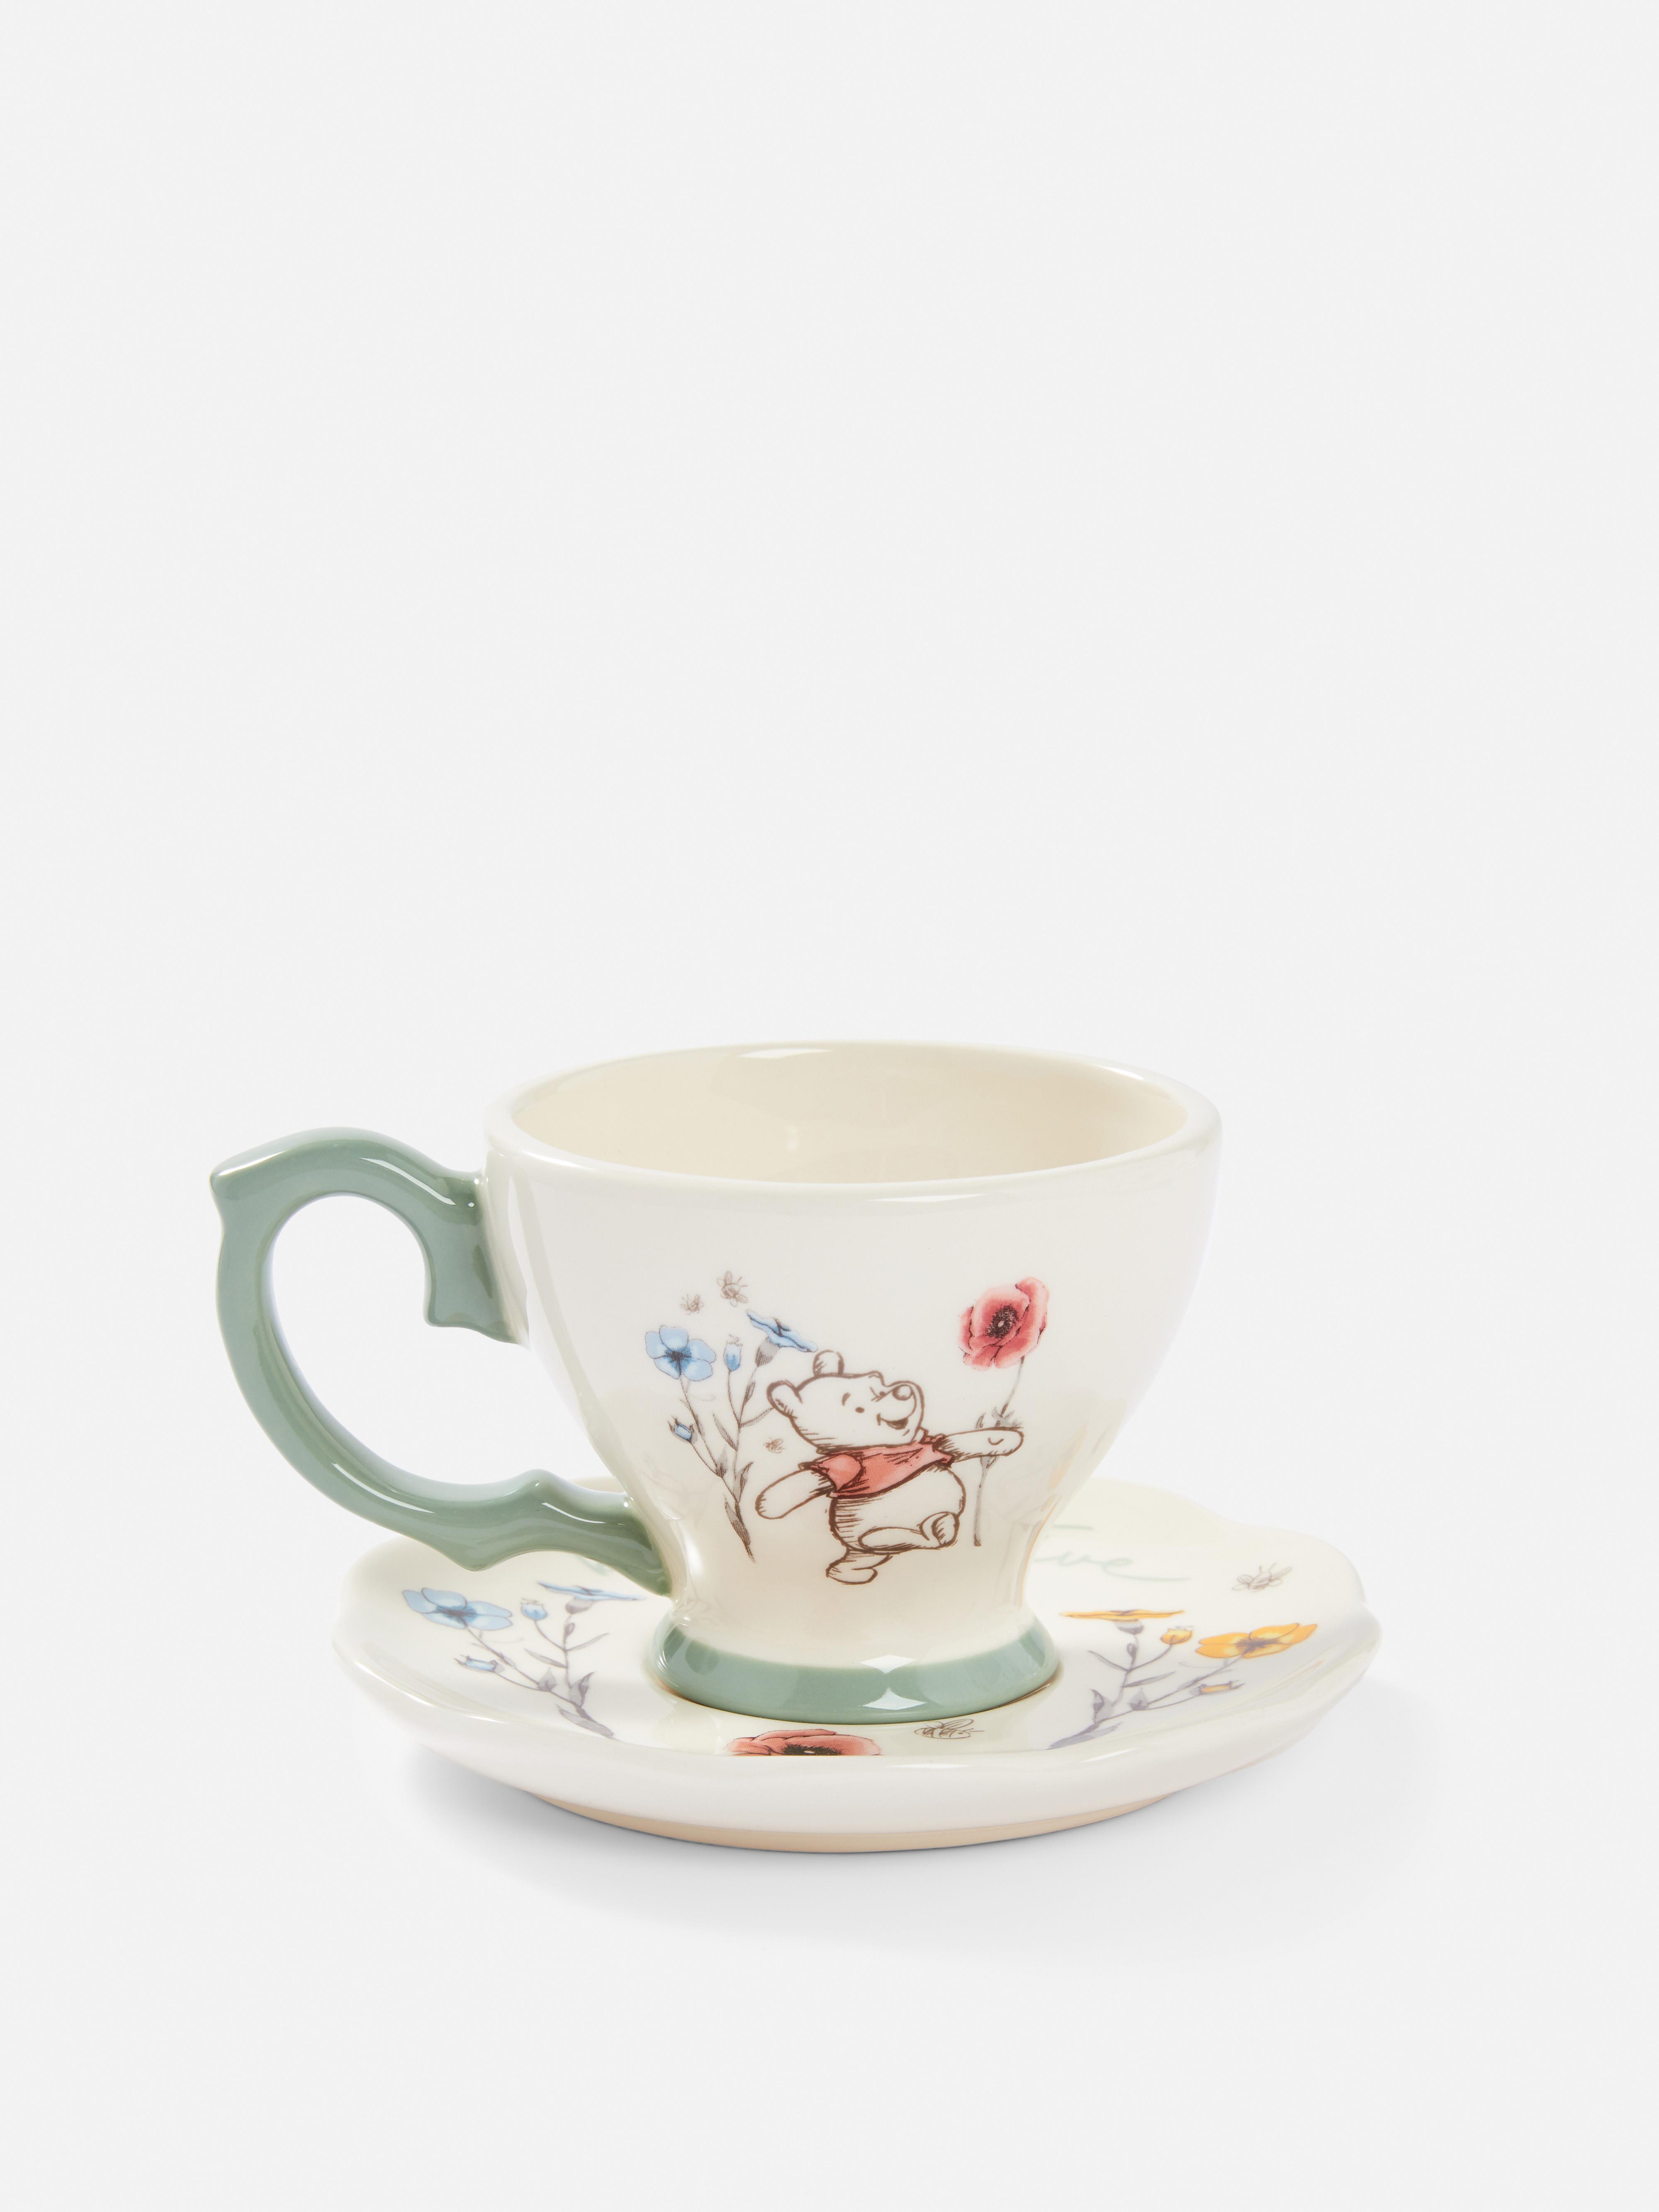 Disney's Winnie the Pooh Cup and Saucer Set